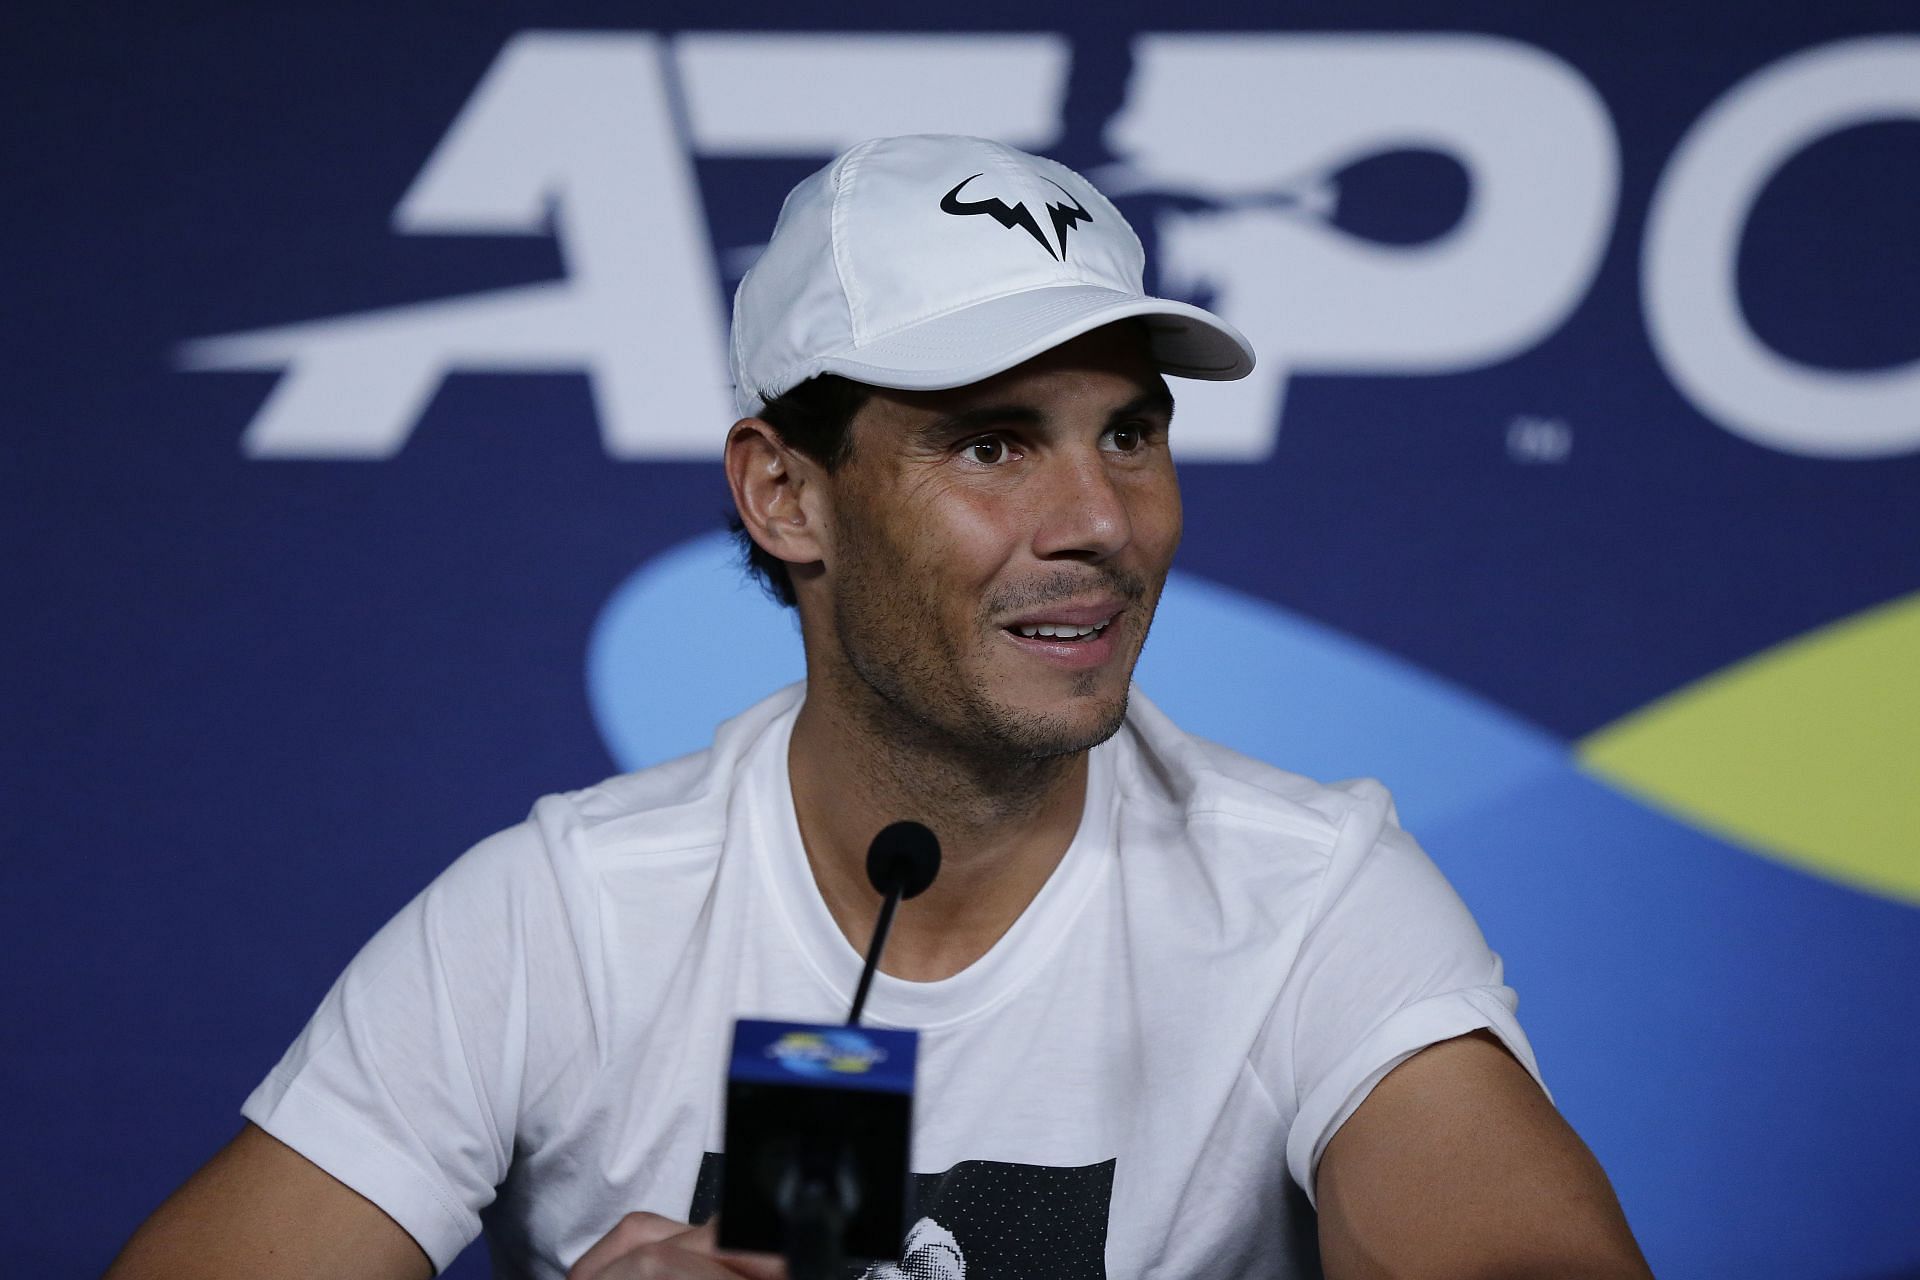 Rafael Nadal has been forced to sit out the next 4-6 weeks with an unexpected rib injury